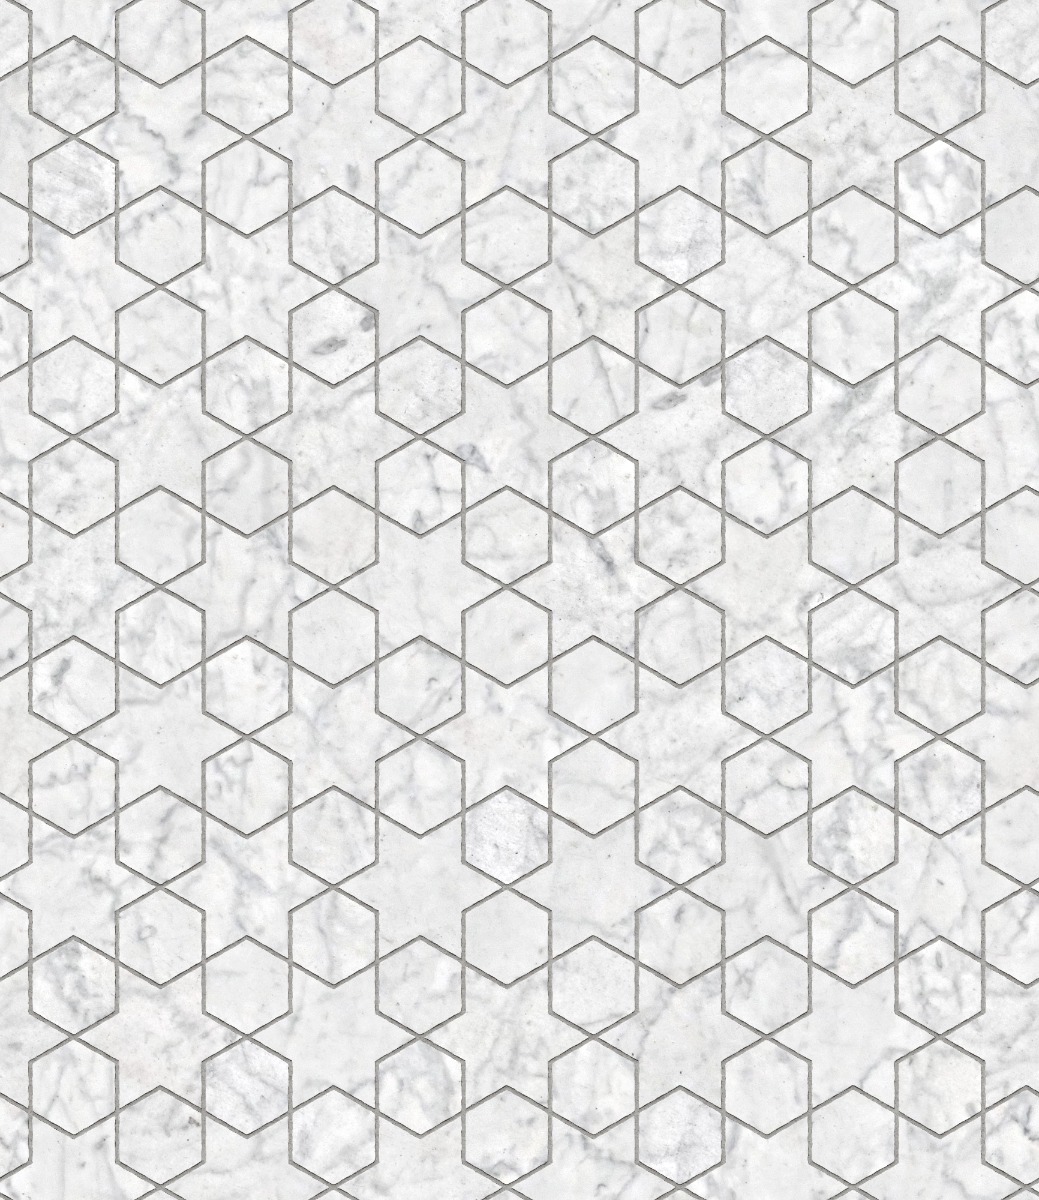 A seamless stone texture with white marble blocks arranged in a Star and Hexagon pattern